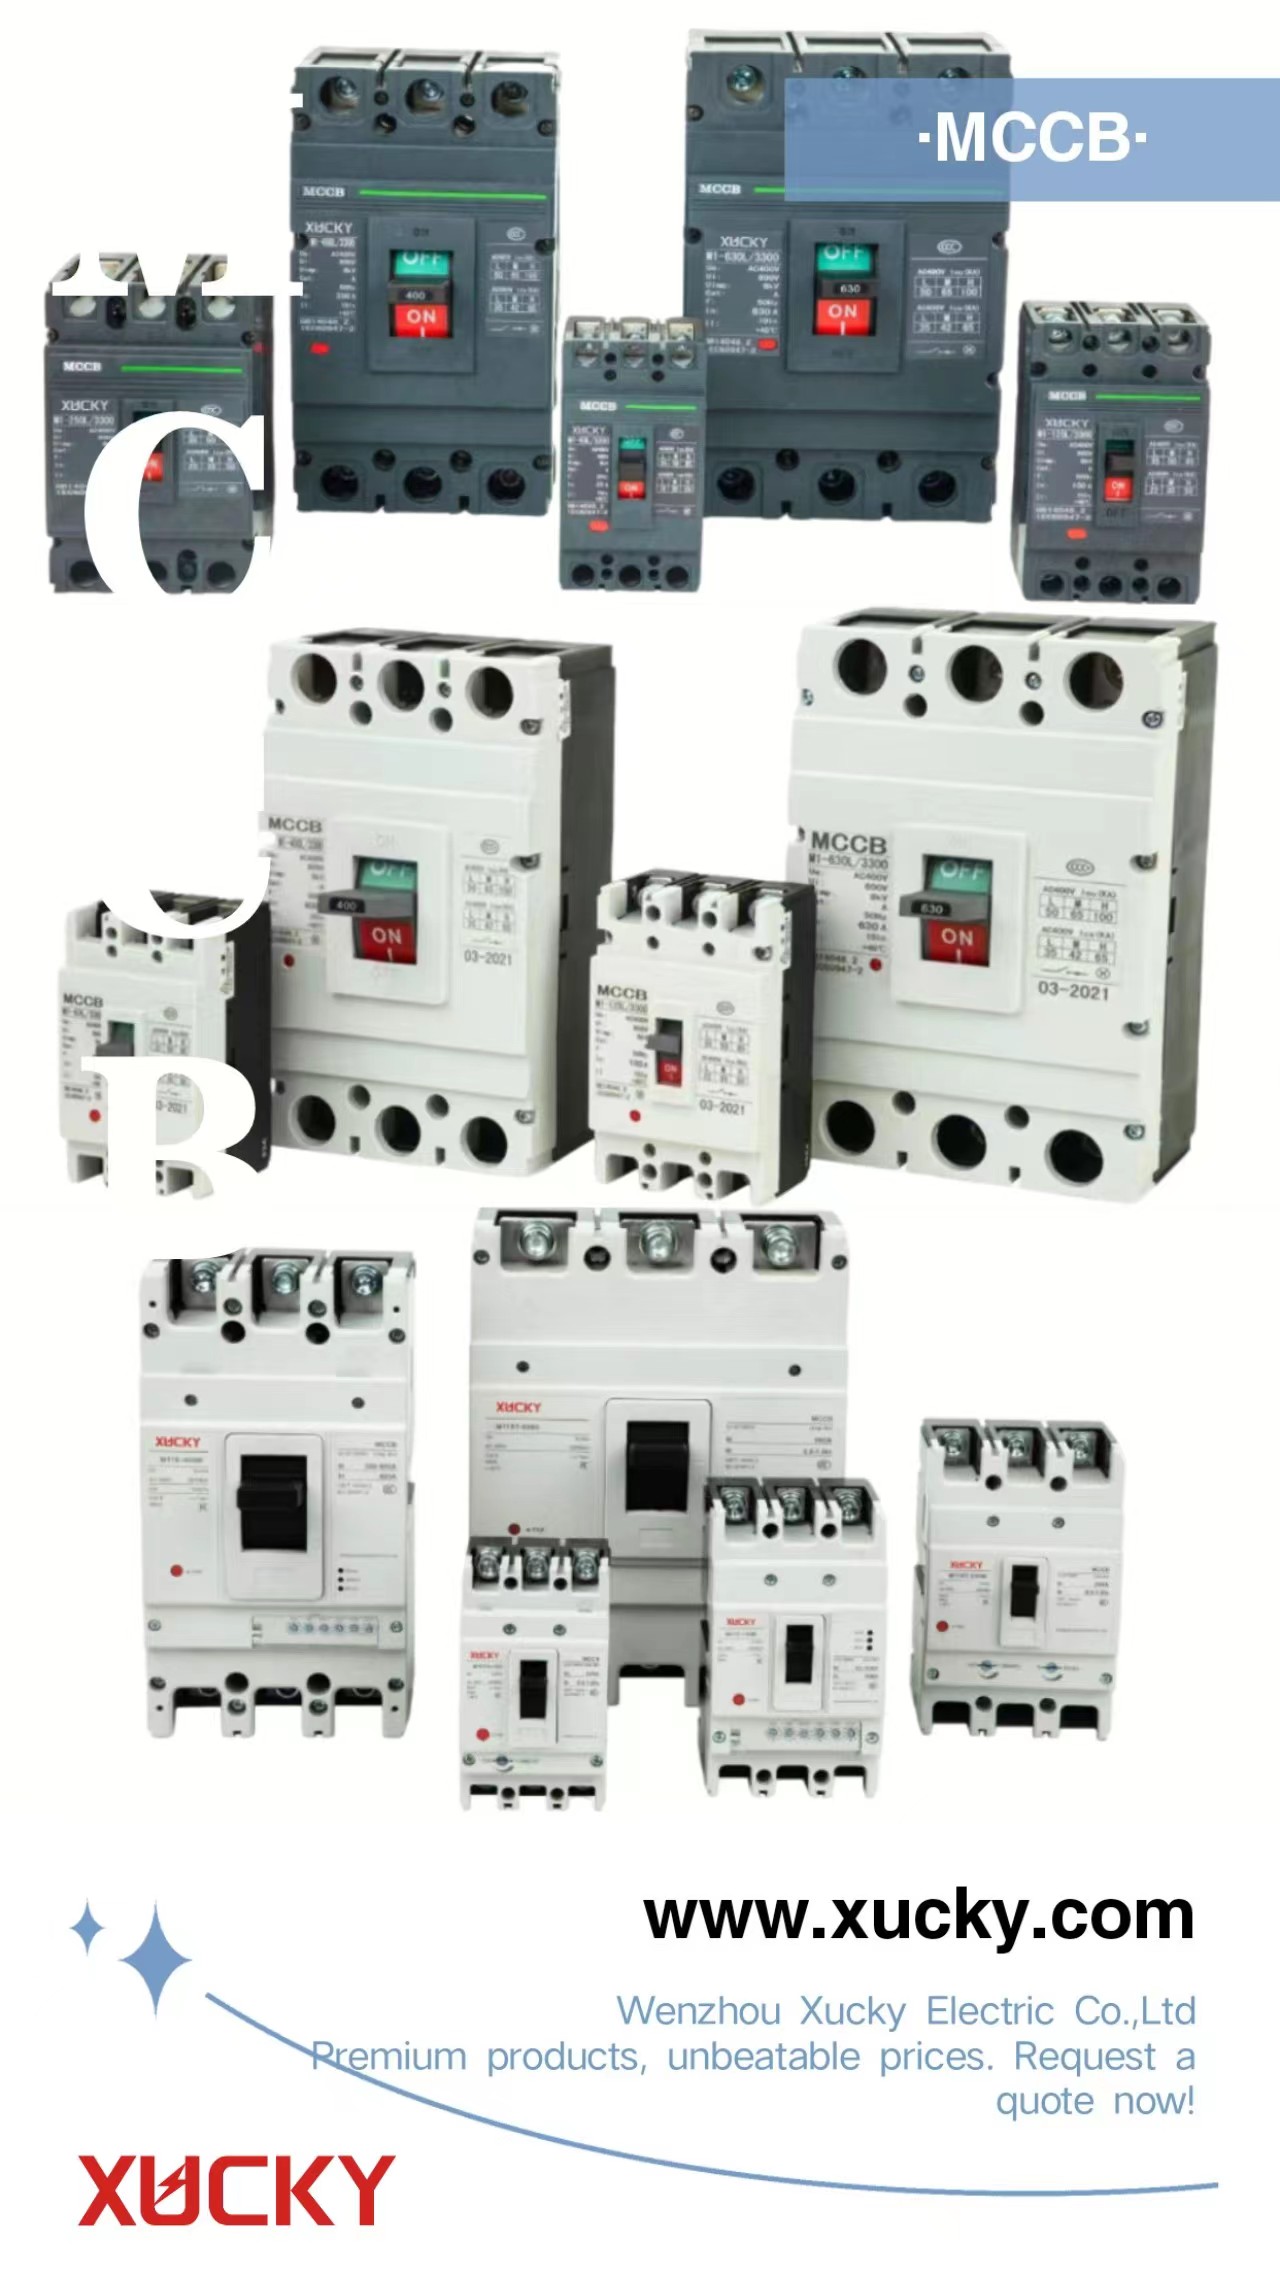 Top 10 Circuit Breaker Brands You Need to Know About